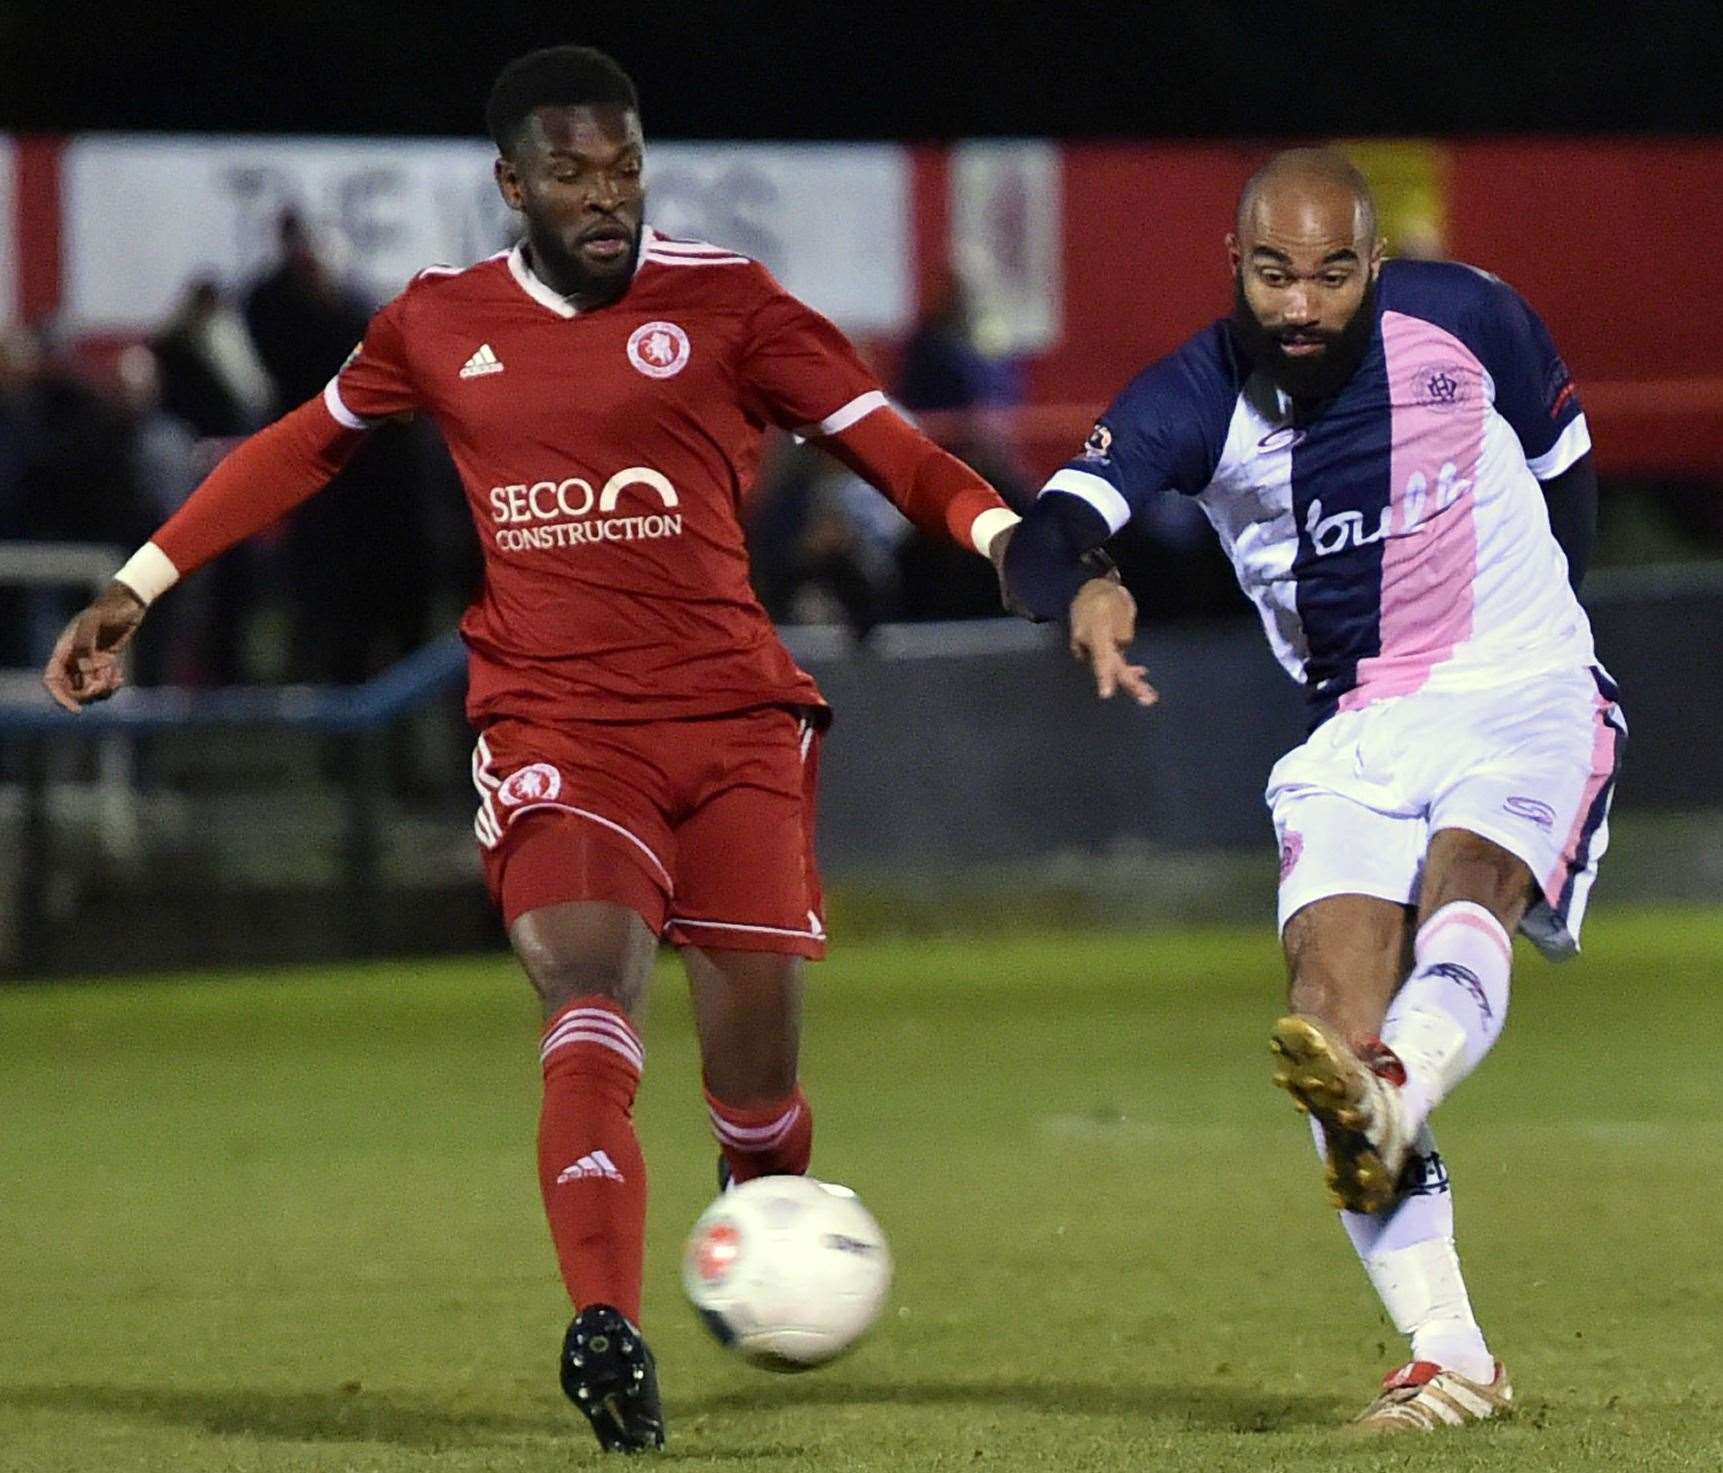 Former Welling player Dominic Vose on the attack for Dulwich. Picture: Keith Gillard